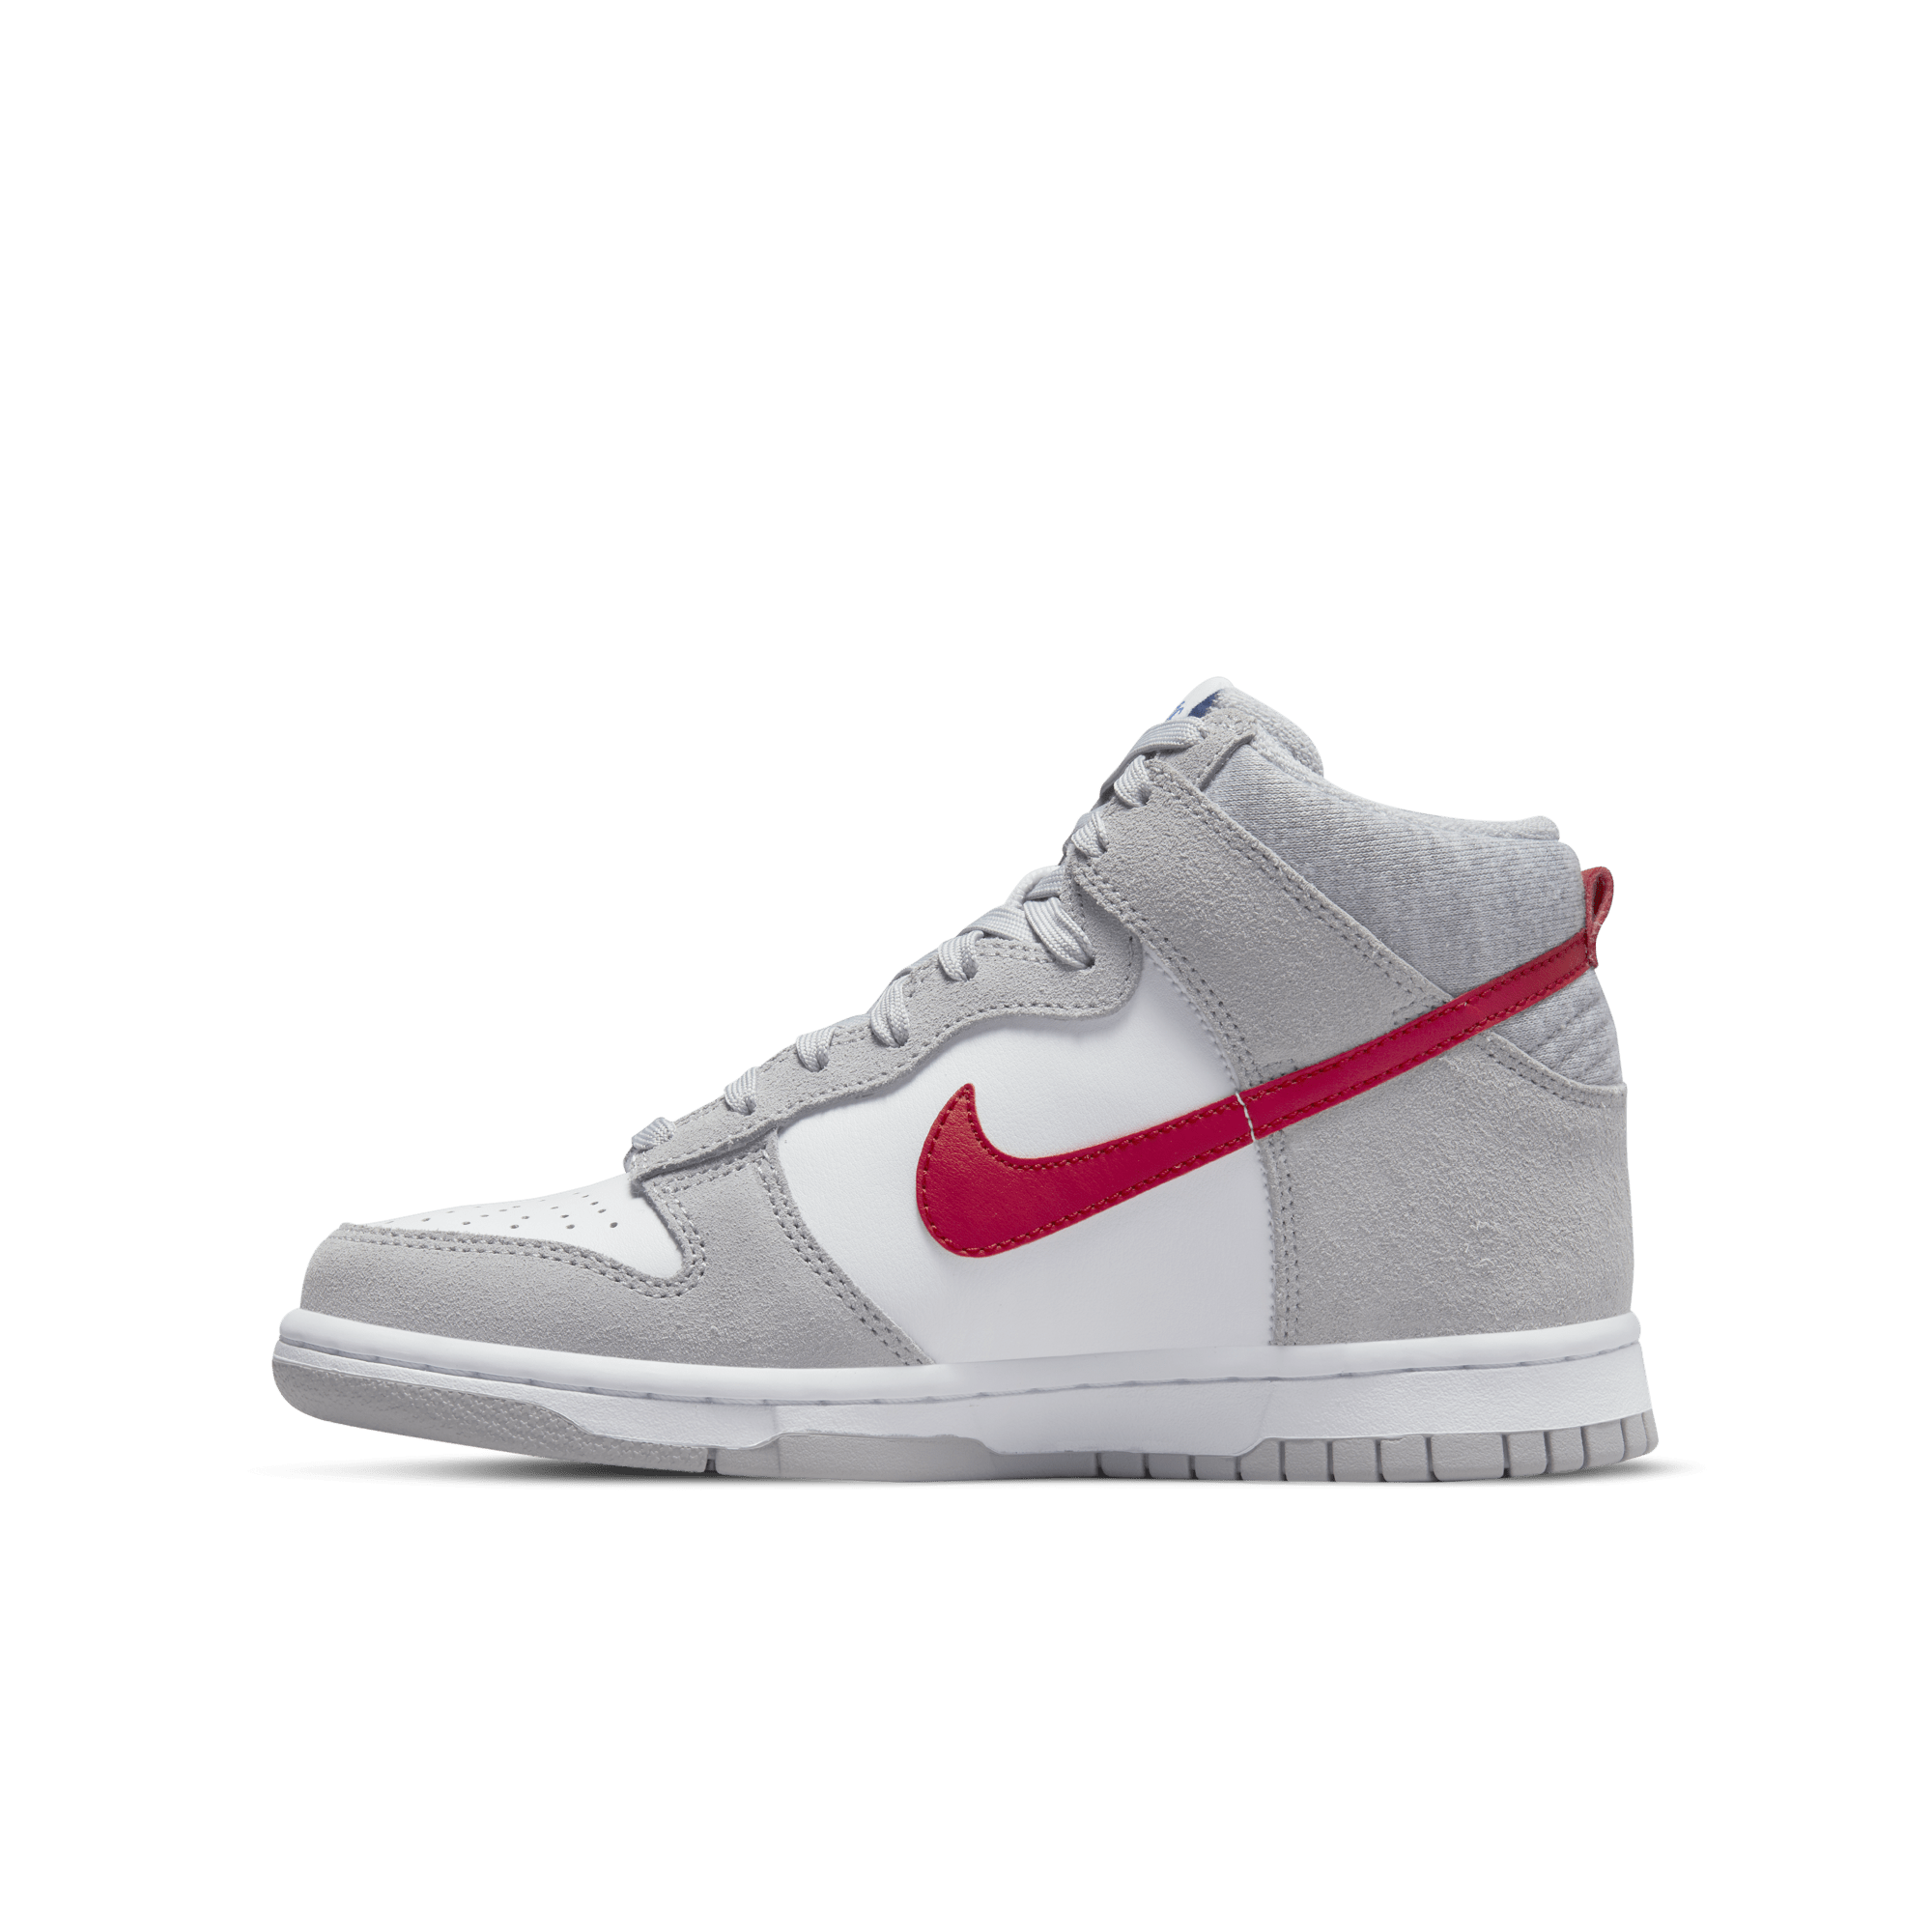 Nike Air Force 1 Mid '07 LV8 Athletic Club White Gym Red Review! 